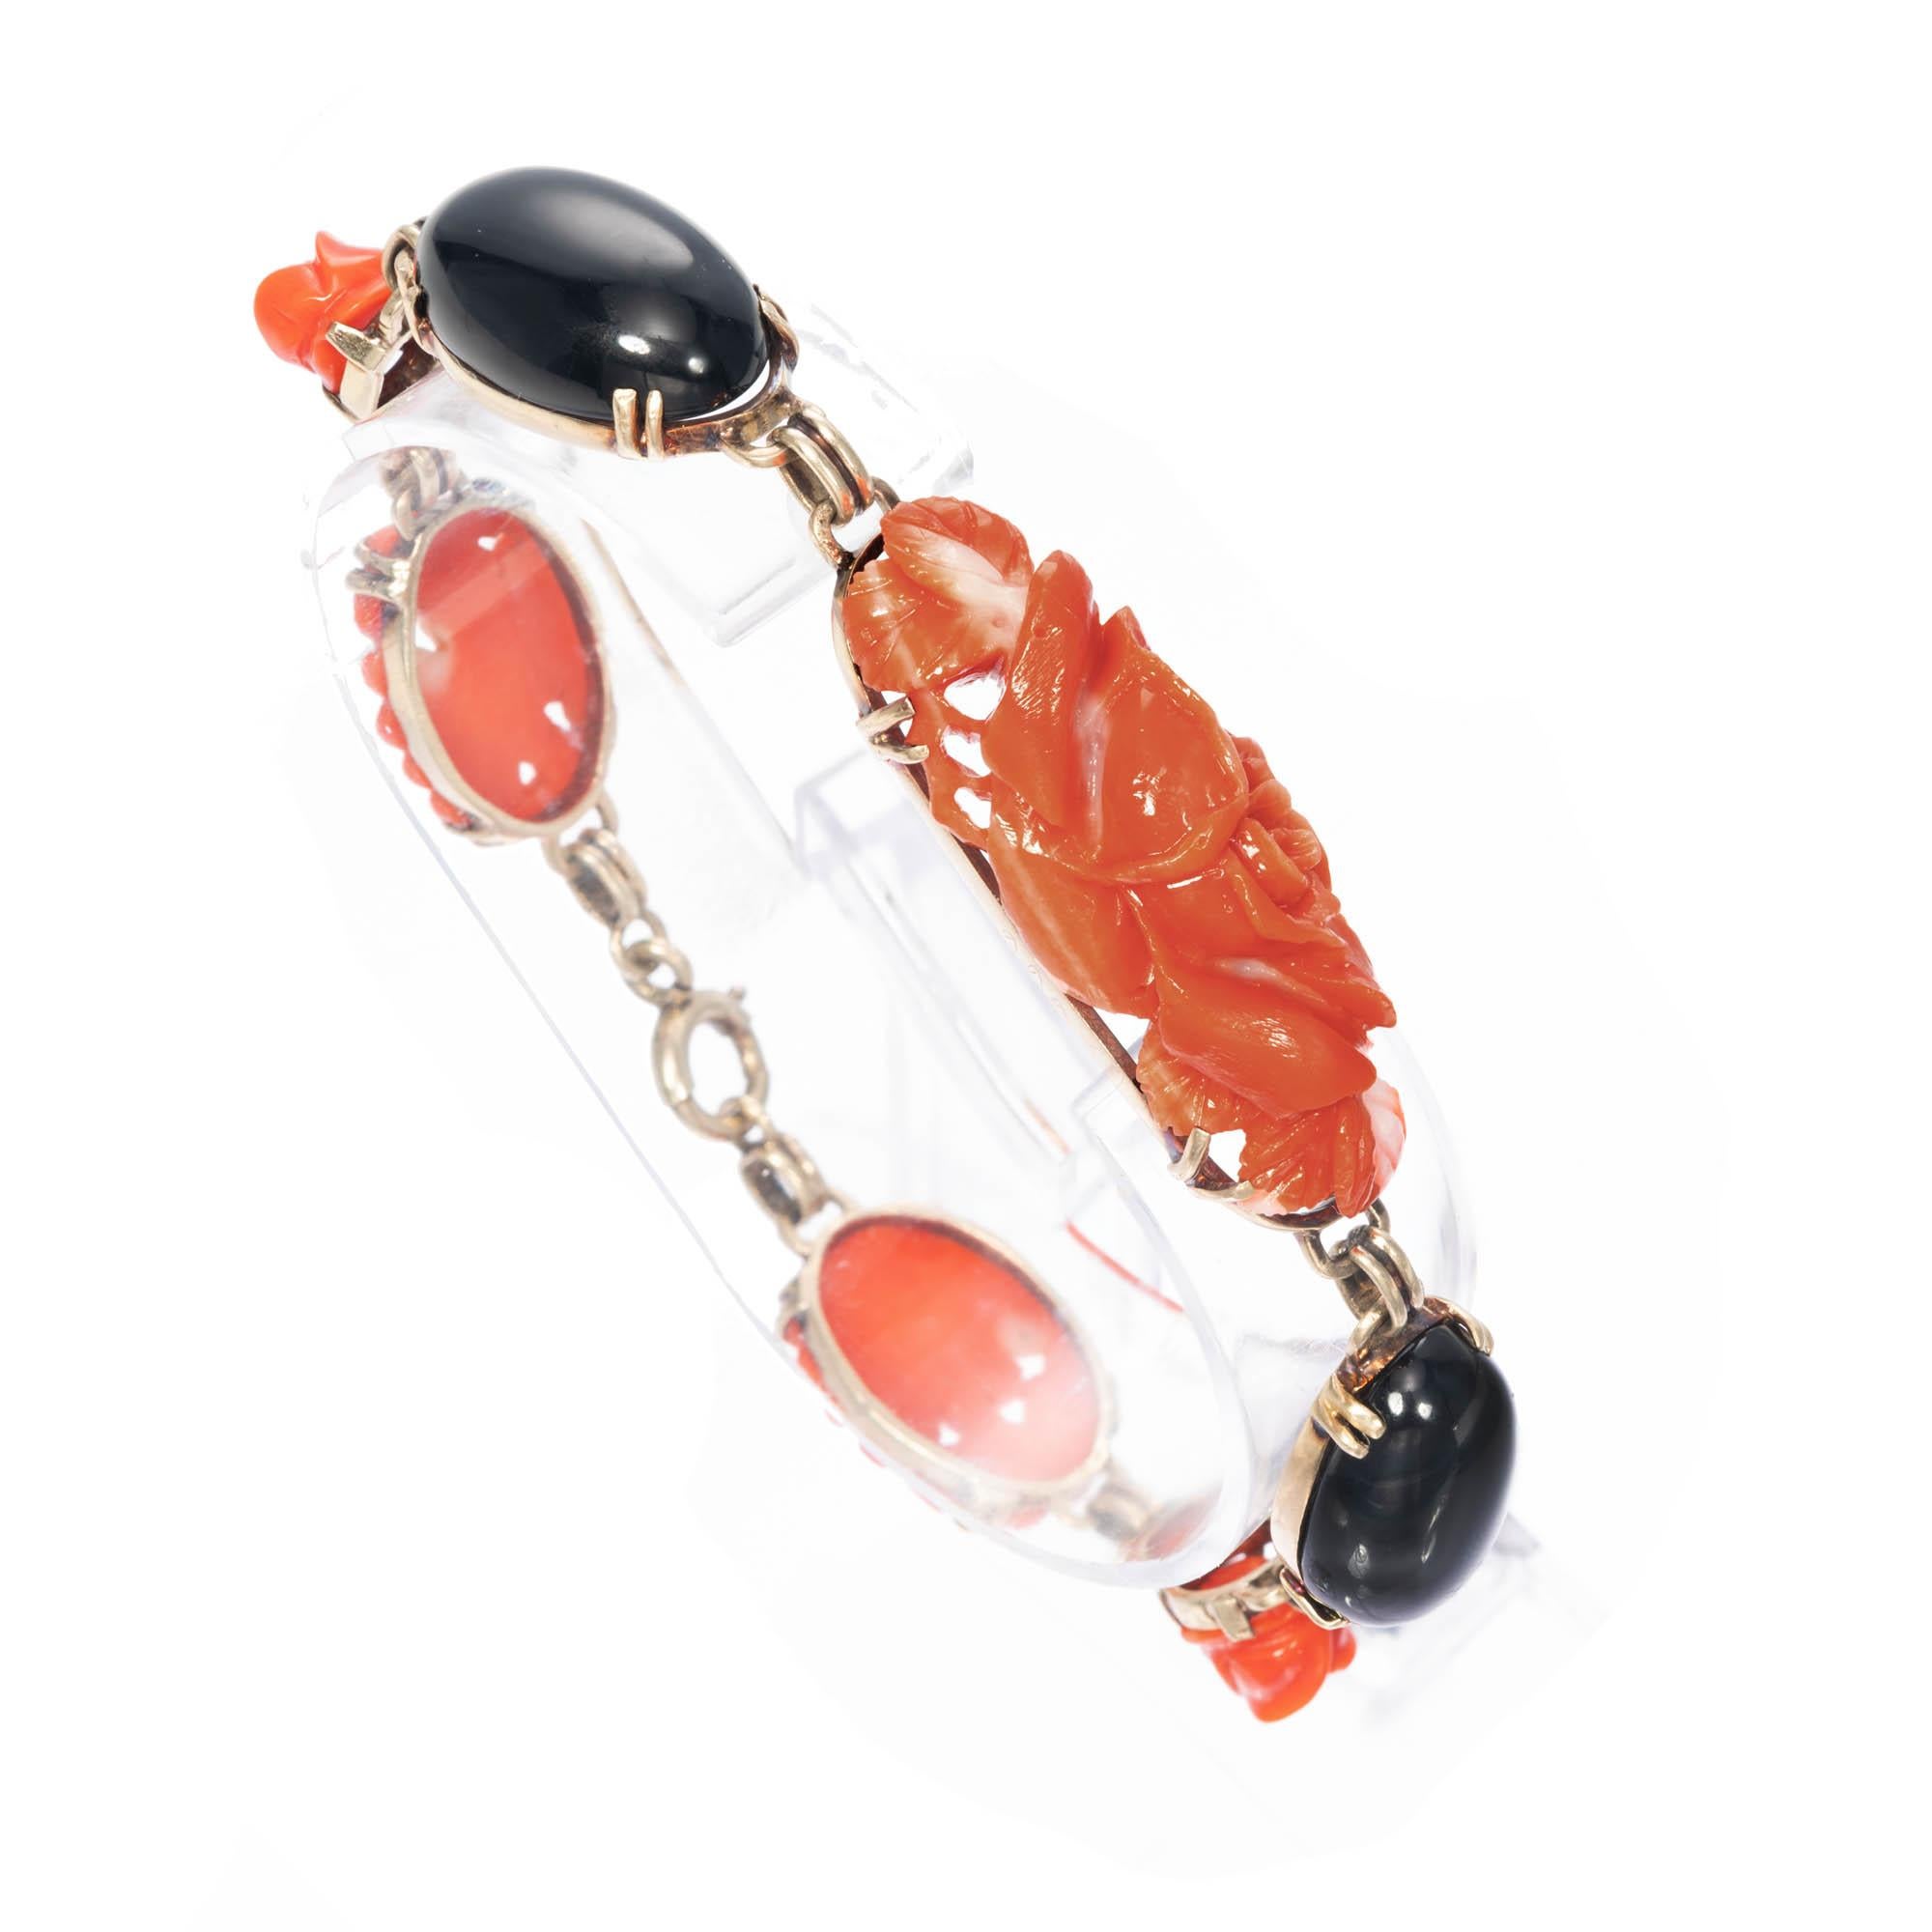 14k yellow gold natural coral and onyx bracelet. Rose carved natural mottled orange coral pieces set in 14k yellow gold with a large black onyx oval cabochon set on either side of center coral. The center coral piece is an elongated 3-Dimensional